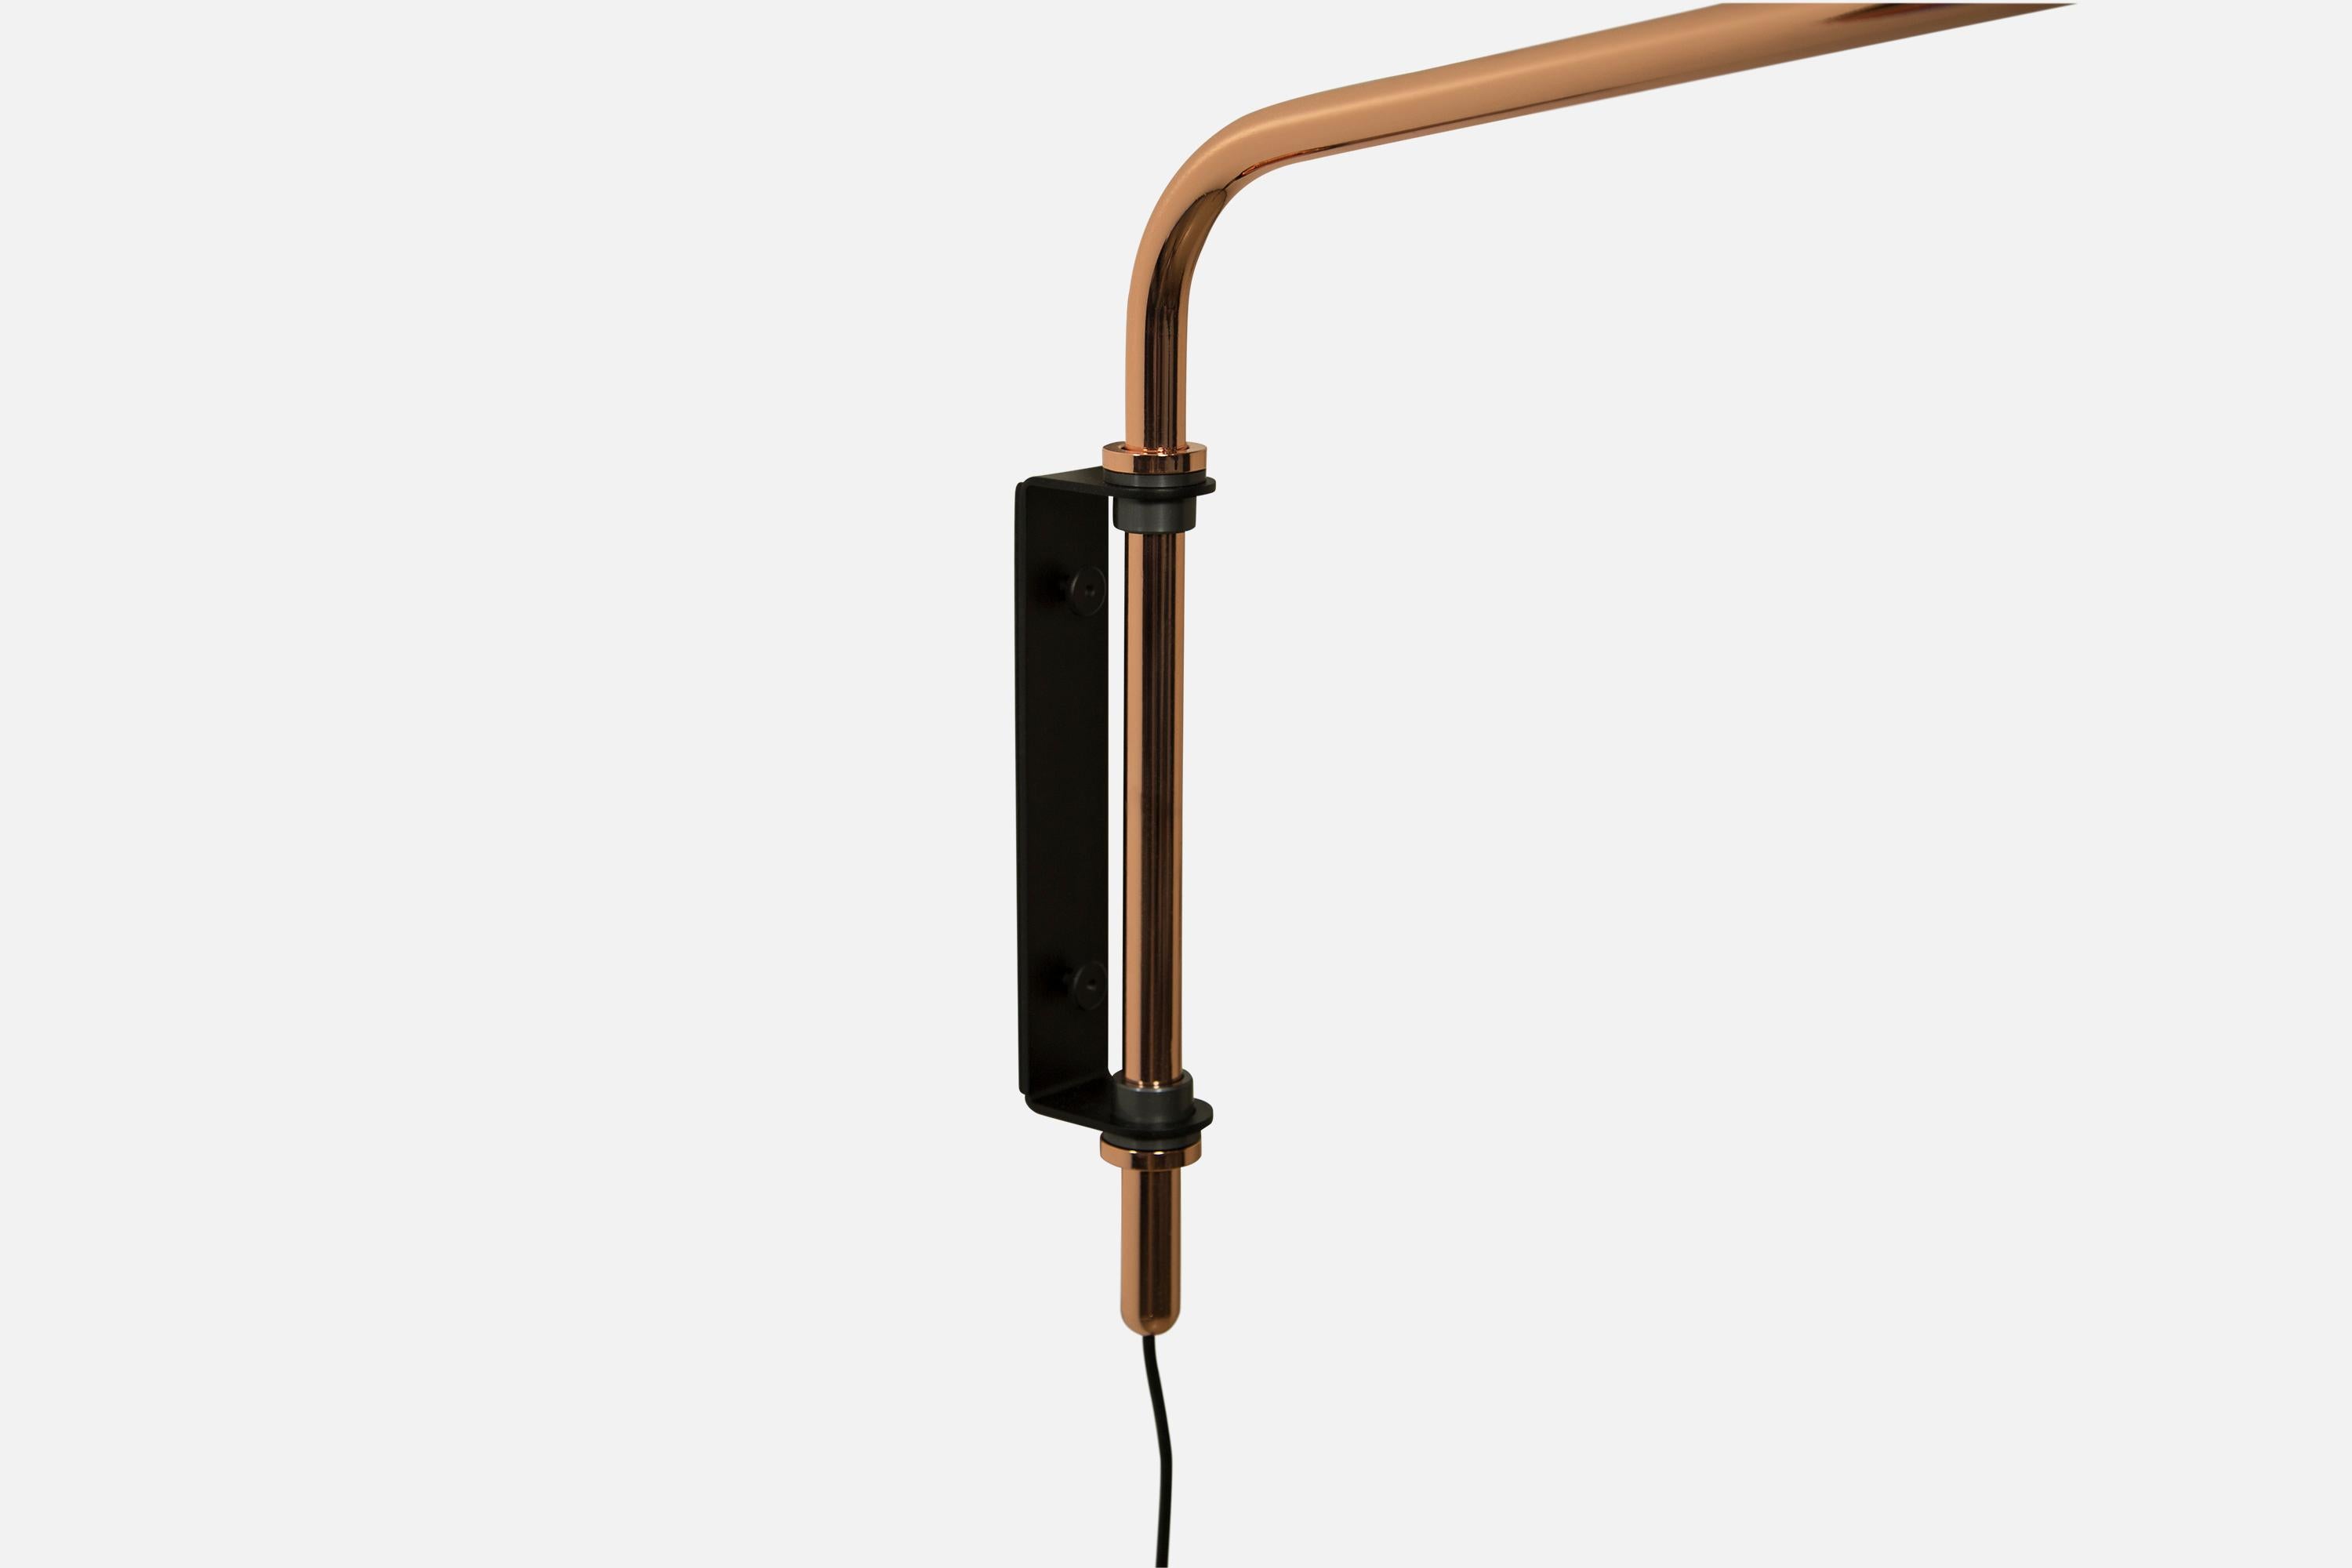 Modern Signal Arm Sconce in Black X Nickel, Long, Hardwire, by Souda, Made to Order For Sale